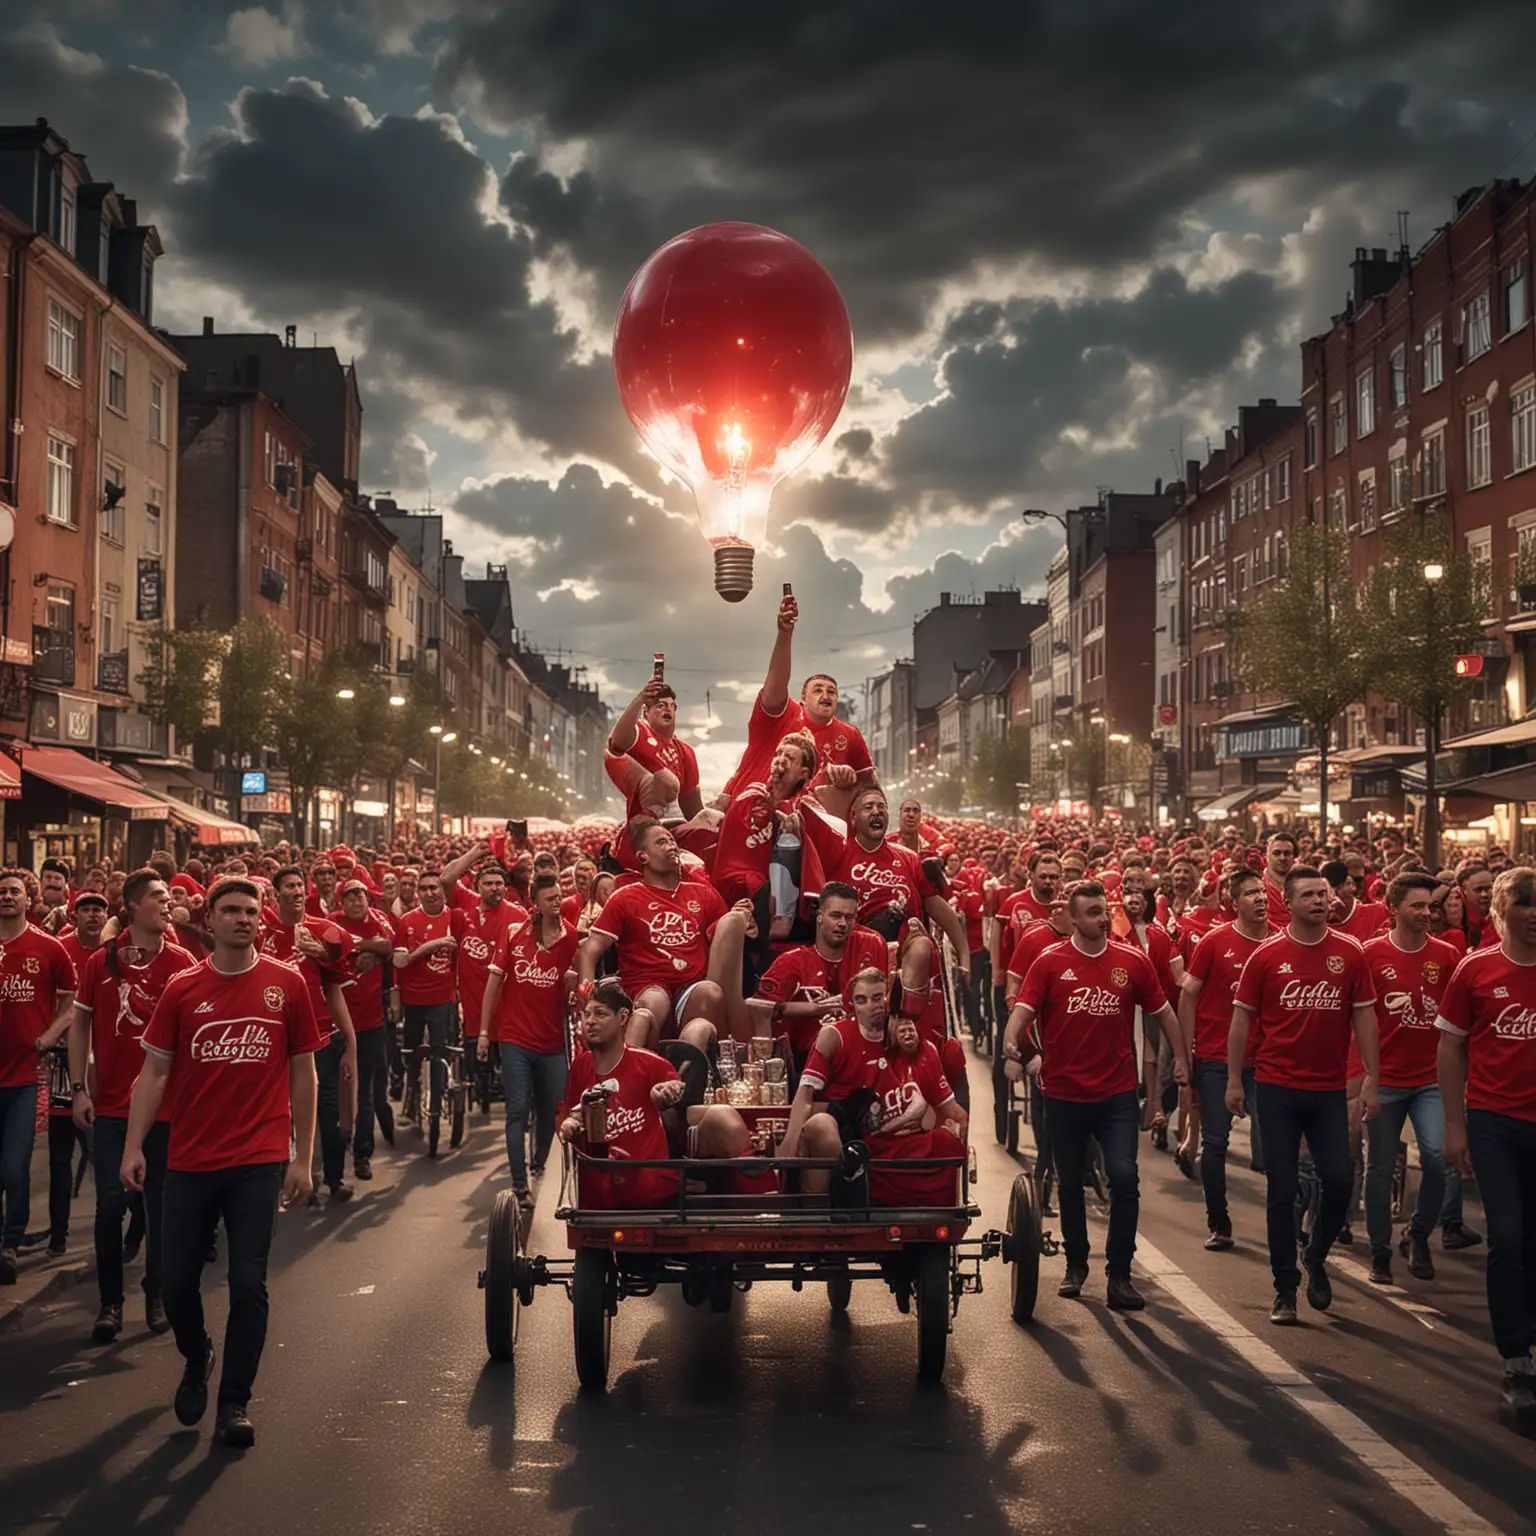 Vibrant Red Football Fans Celebrating with Beer and Cart Rides under Illuminated City Skyline